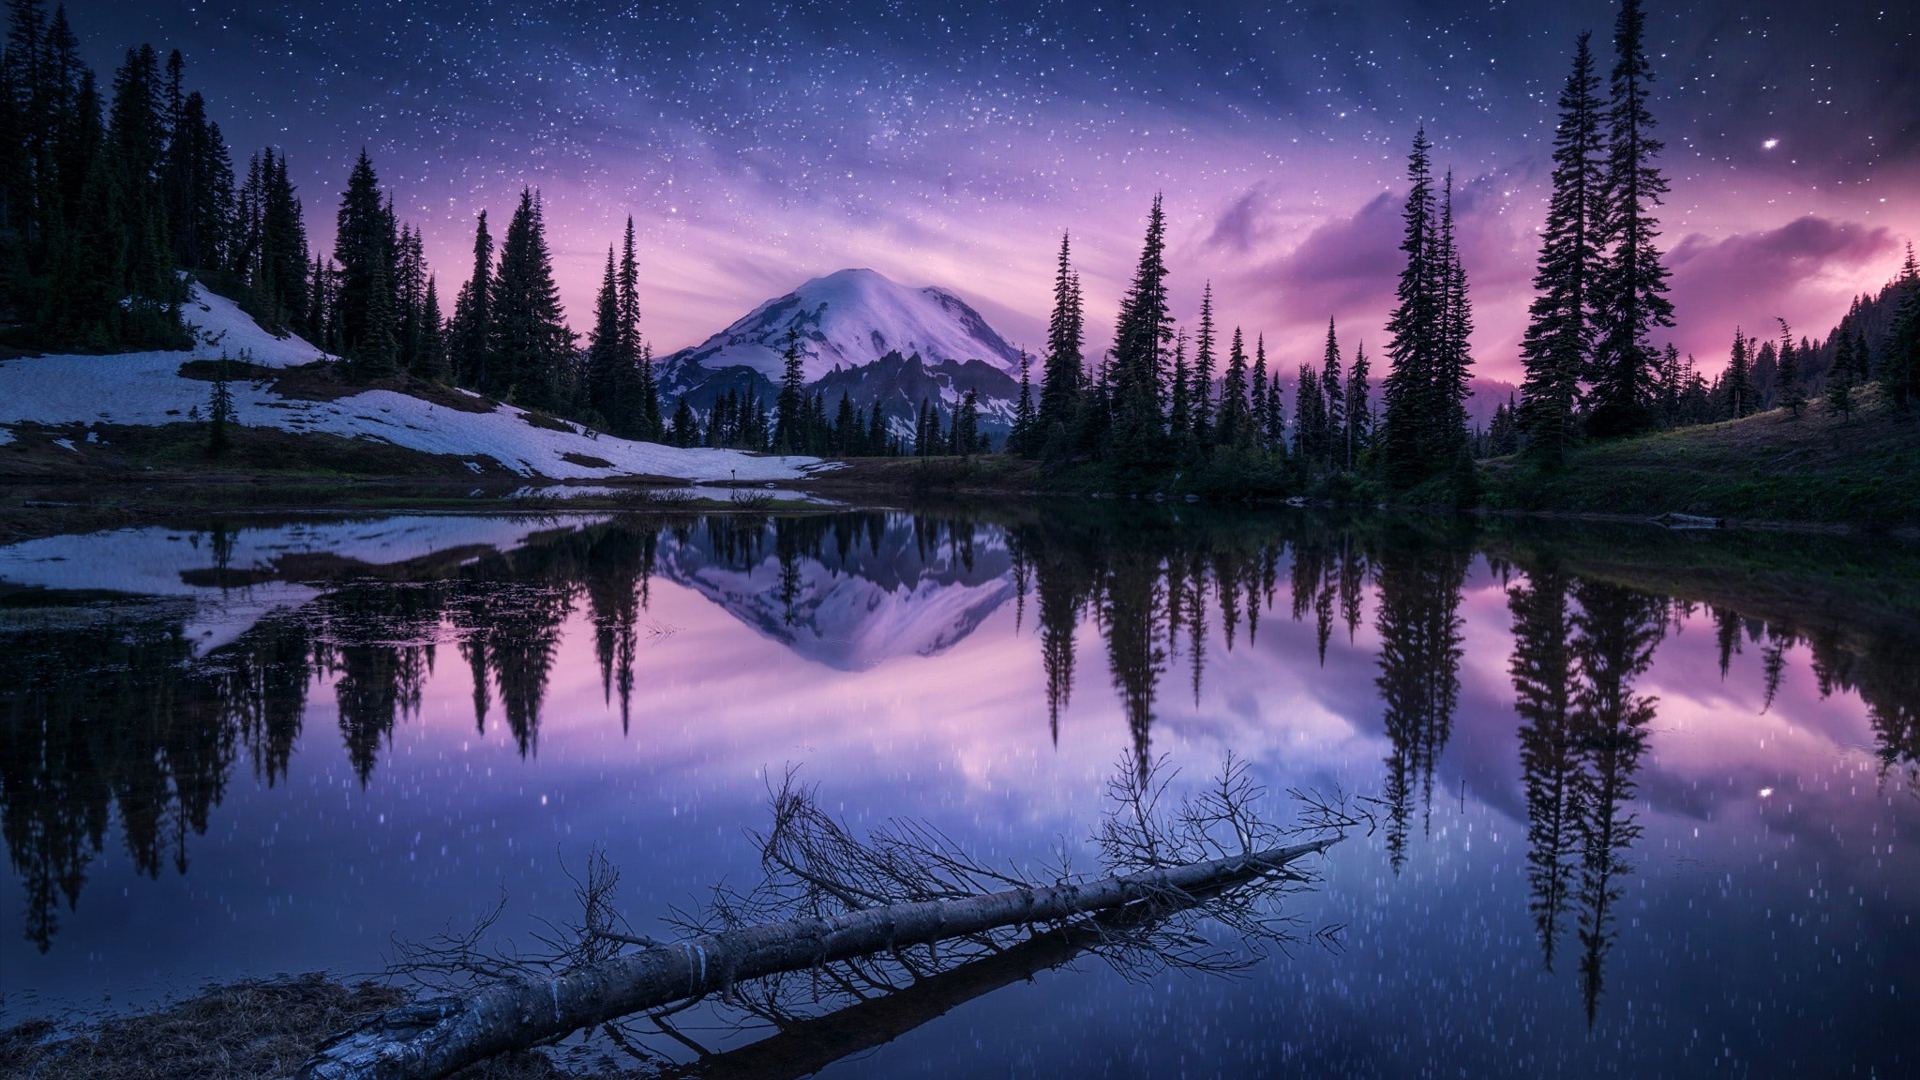 Beautiful Scenery Spruce Trees Snow Covered Mountain Under Starry Sky Reflection On River 2K Nature